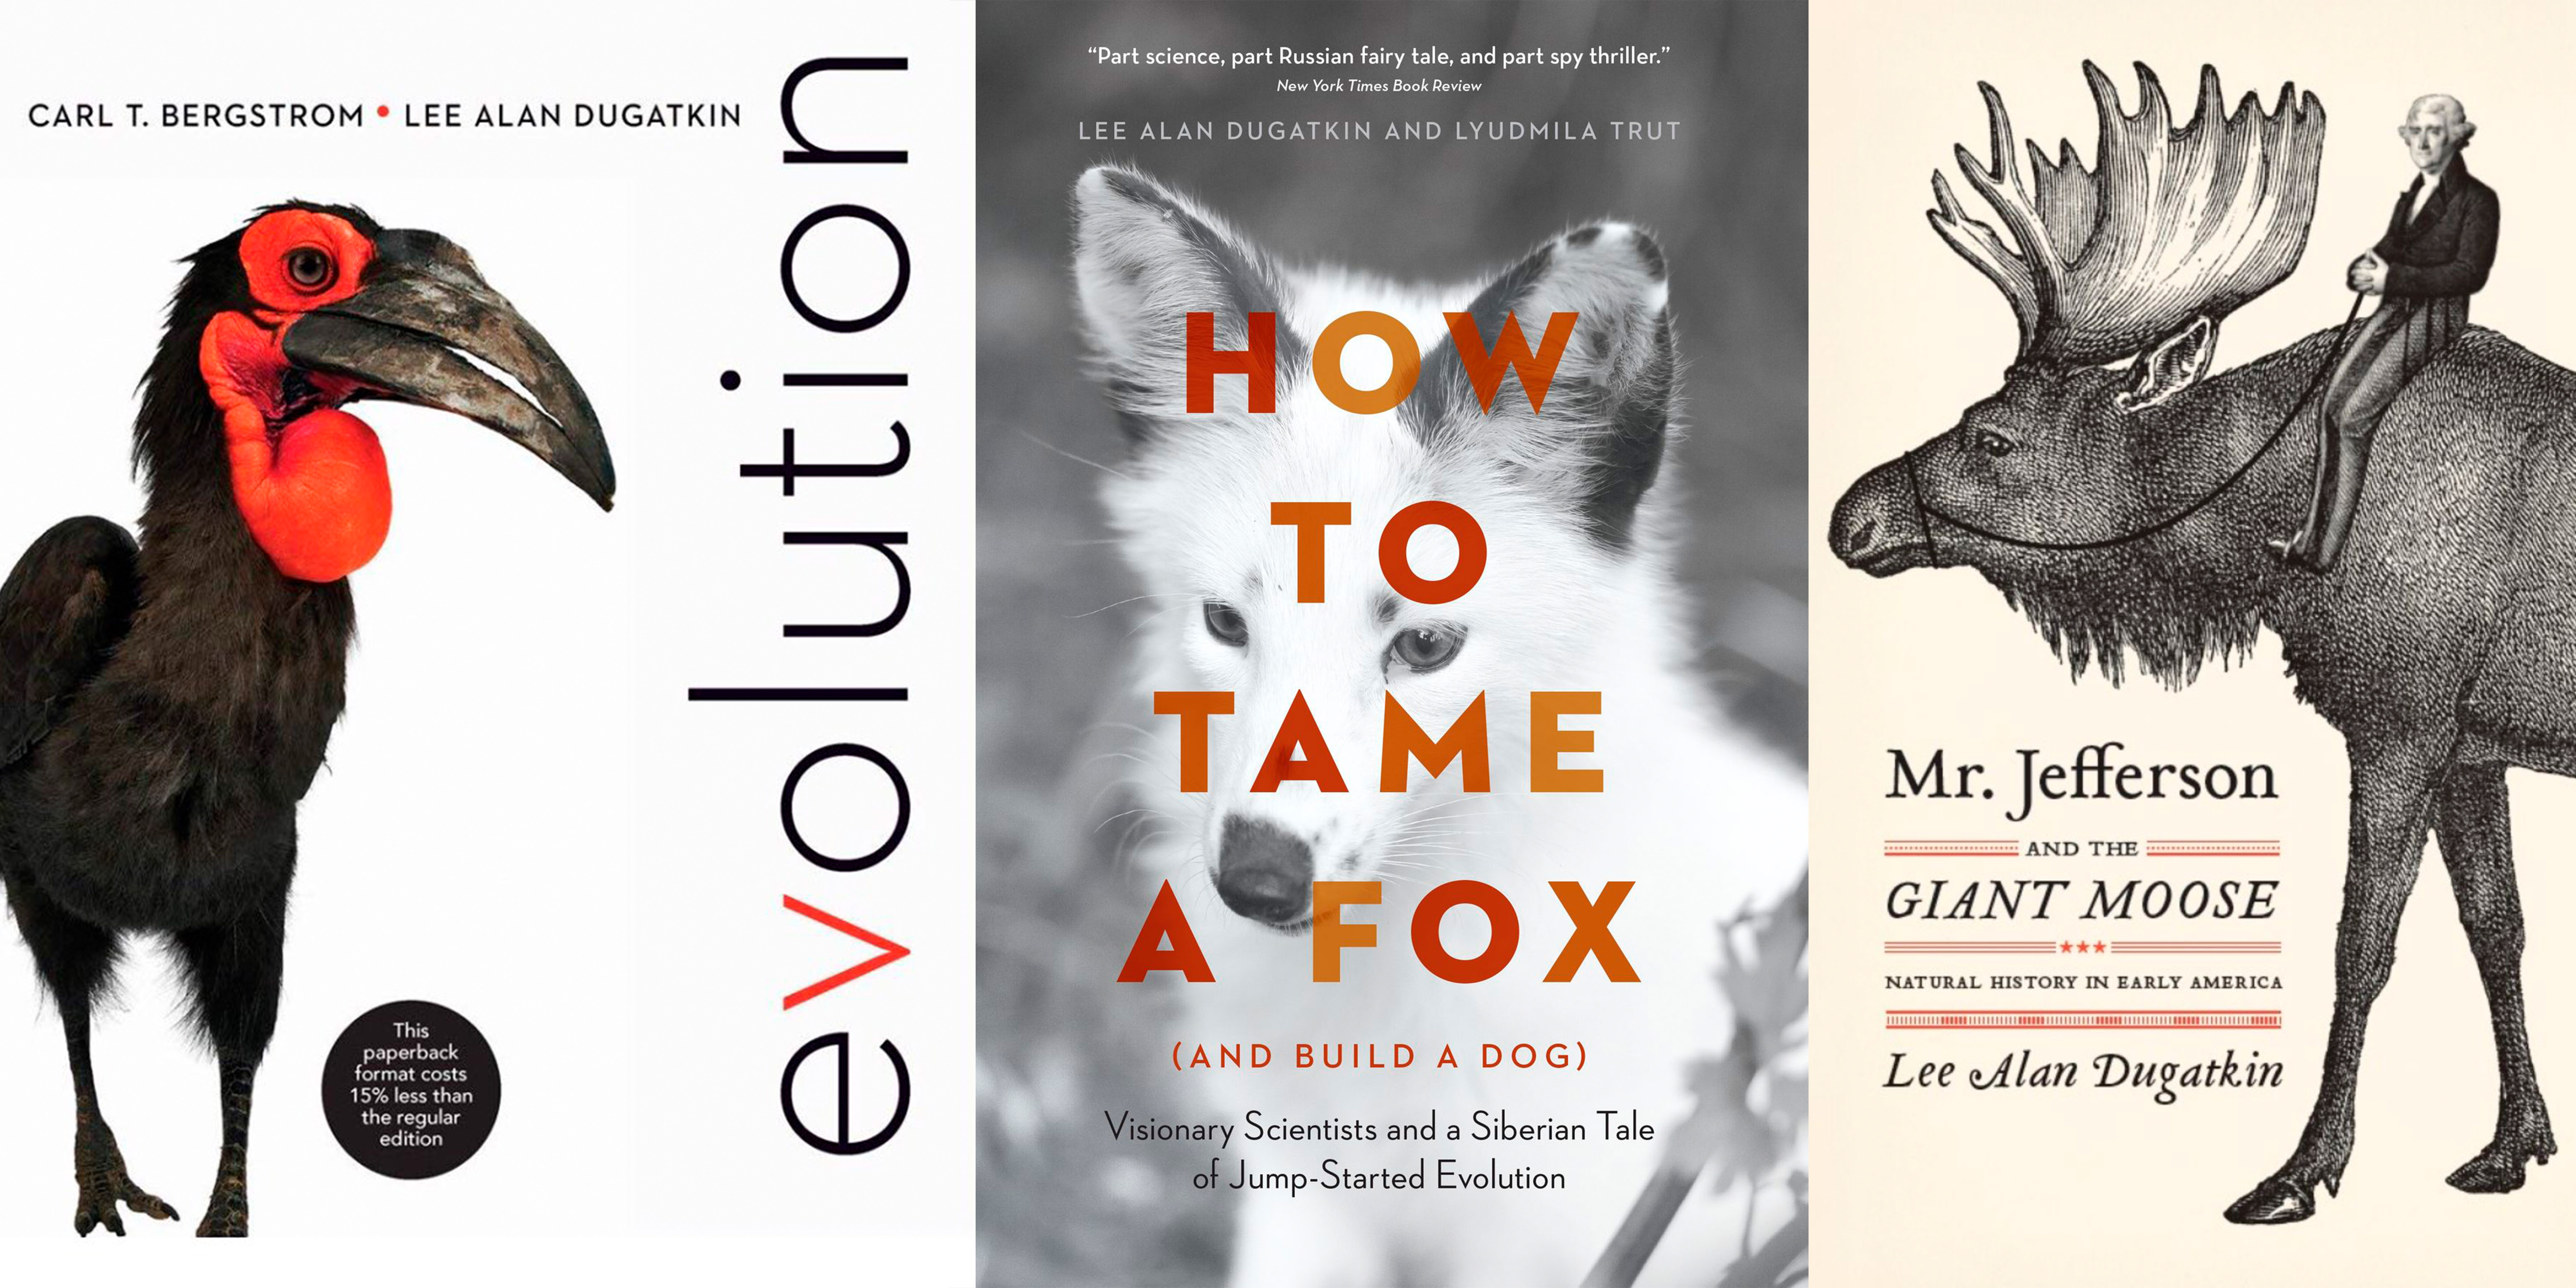 Обложки книг «Evolution» (написана совместно с&nbsp;Карлом Бергстрёмом), «How to Tame a Fox (and Build a Dog): Visionary Scientists and a Siberian Tale of Jump-Started Evolution» (написана совместно с&nbsp;Людмилой Трут), «Mr. Jefferson and the Giant Moose: Natural History in Early America»